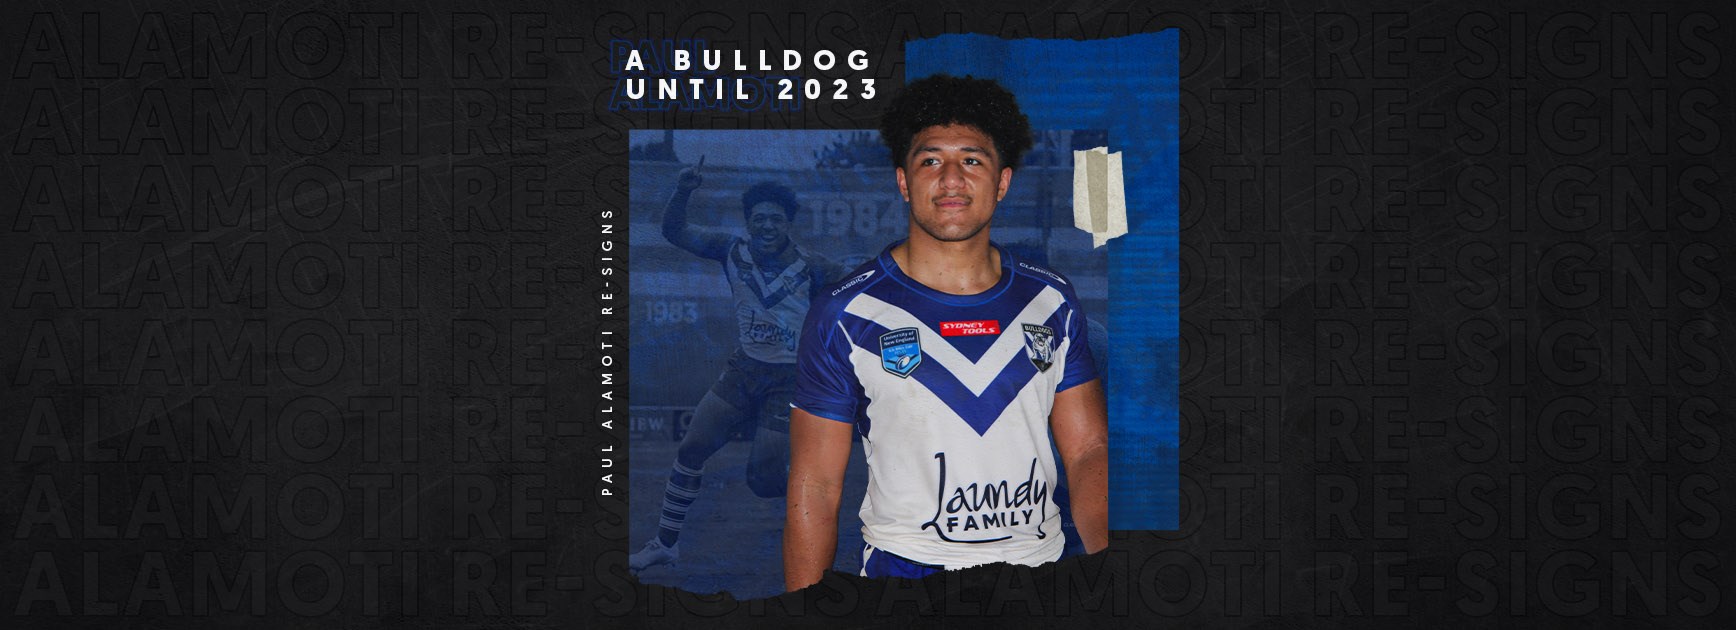 Paul Alamoti signs with the Bulldogs until the end of 2023